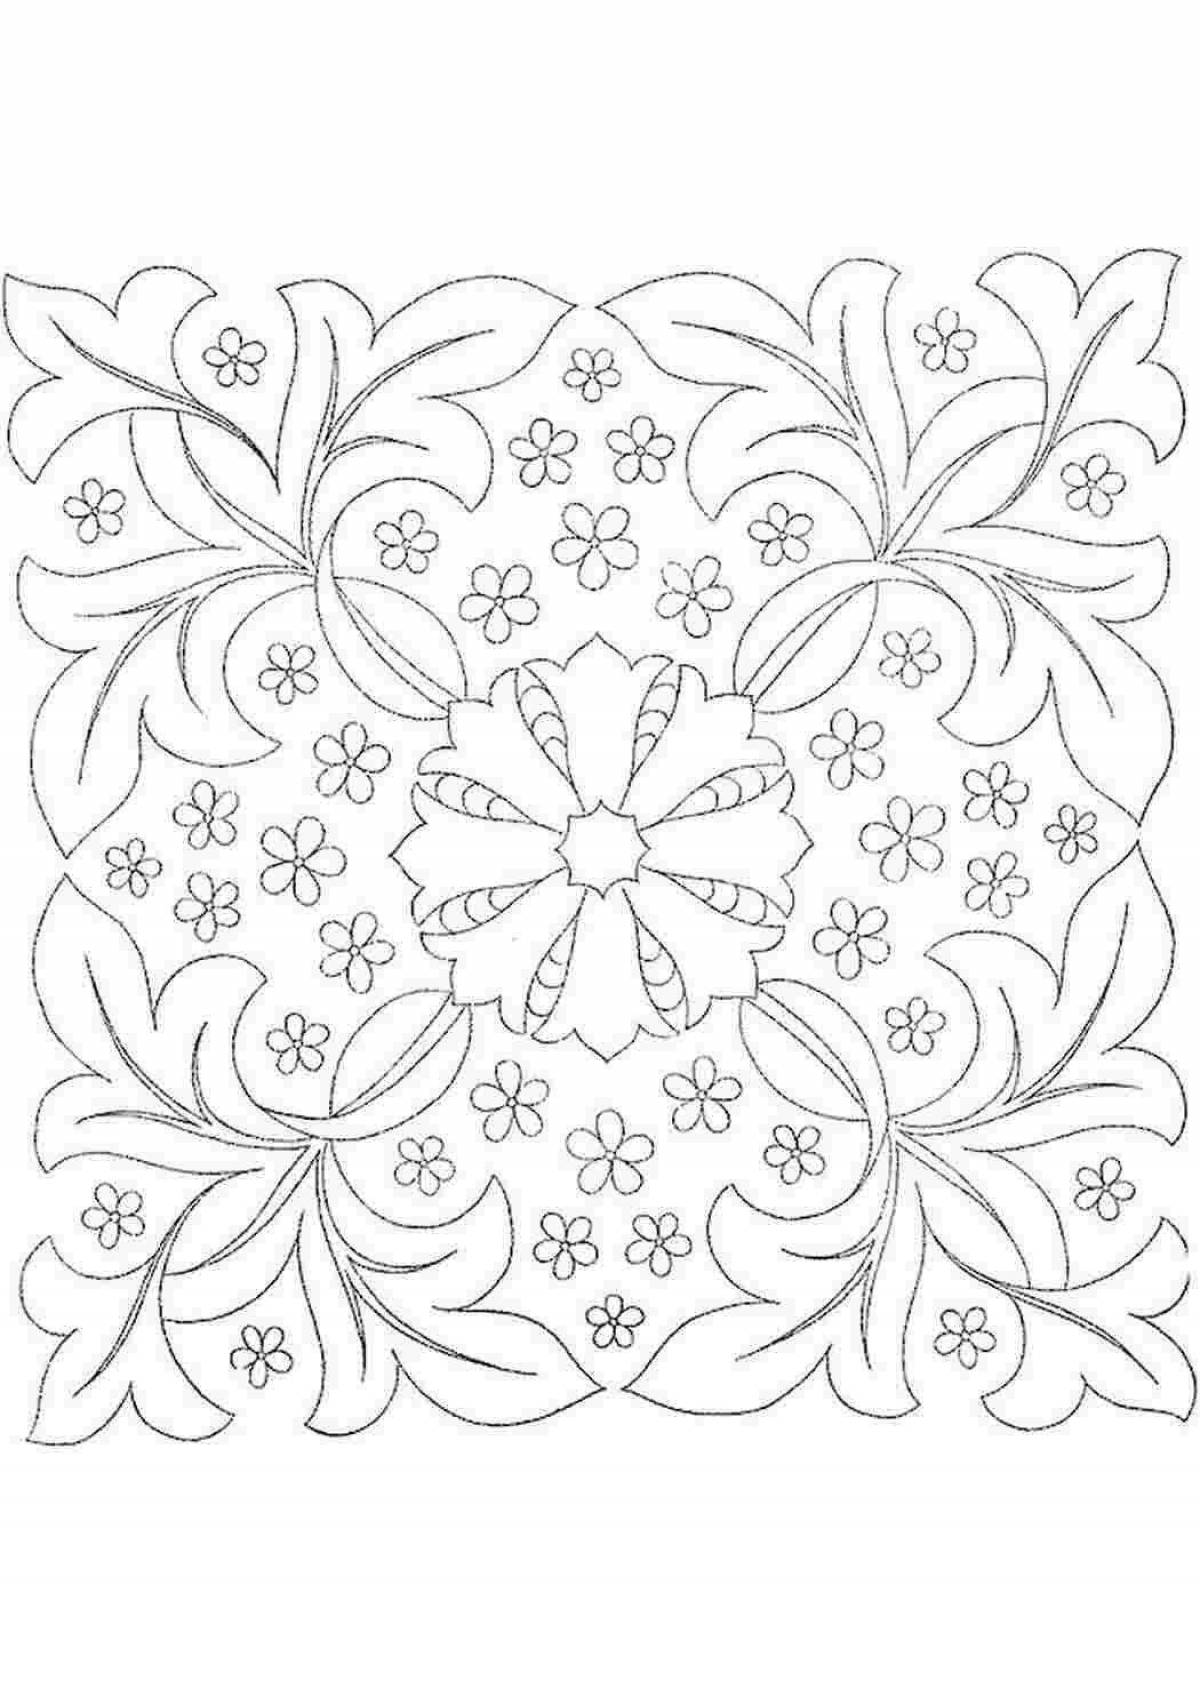 Coloring book magical pavlovian scarf for kids